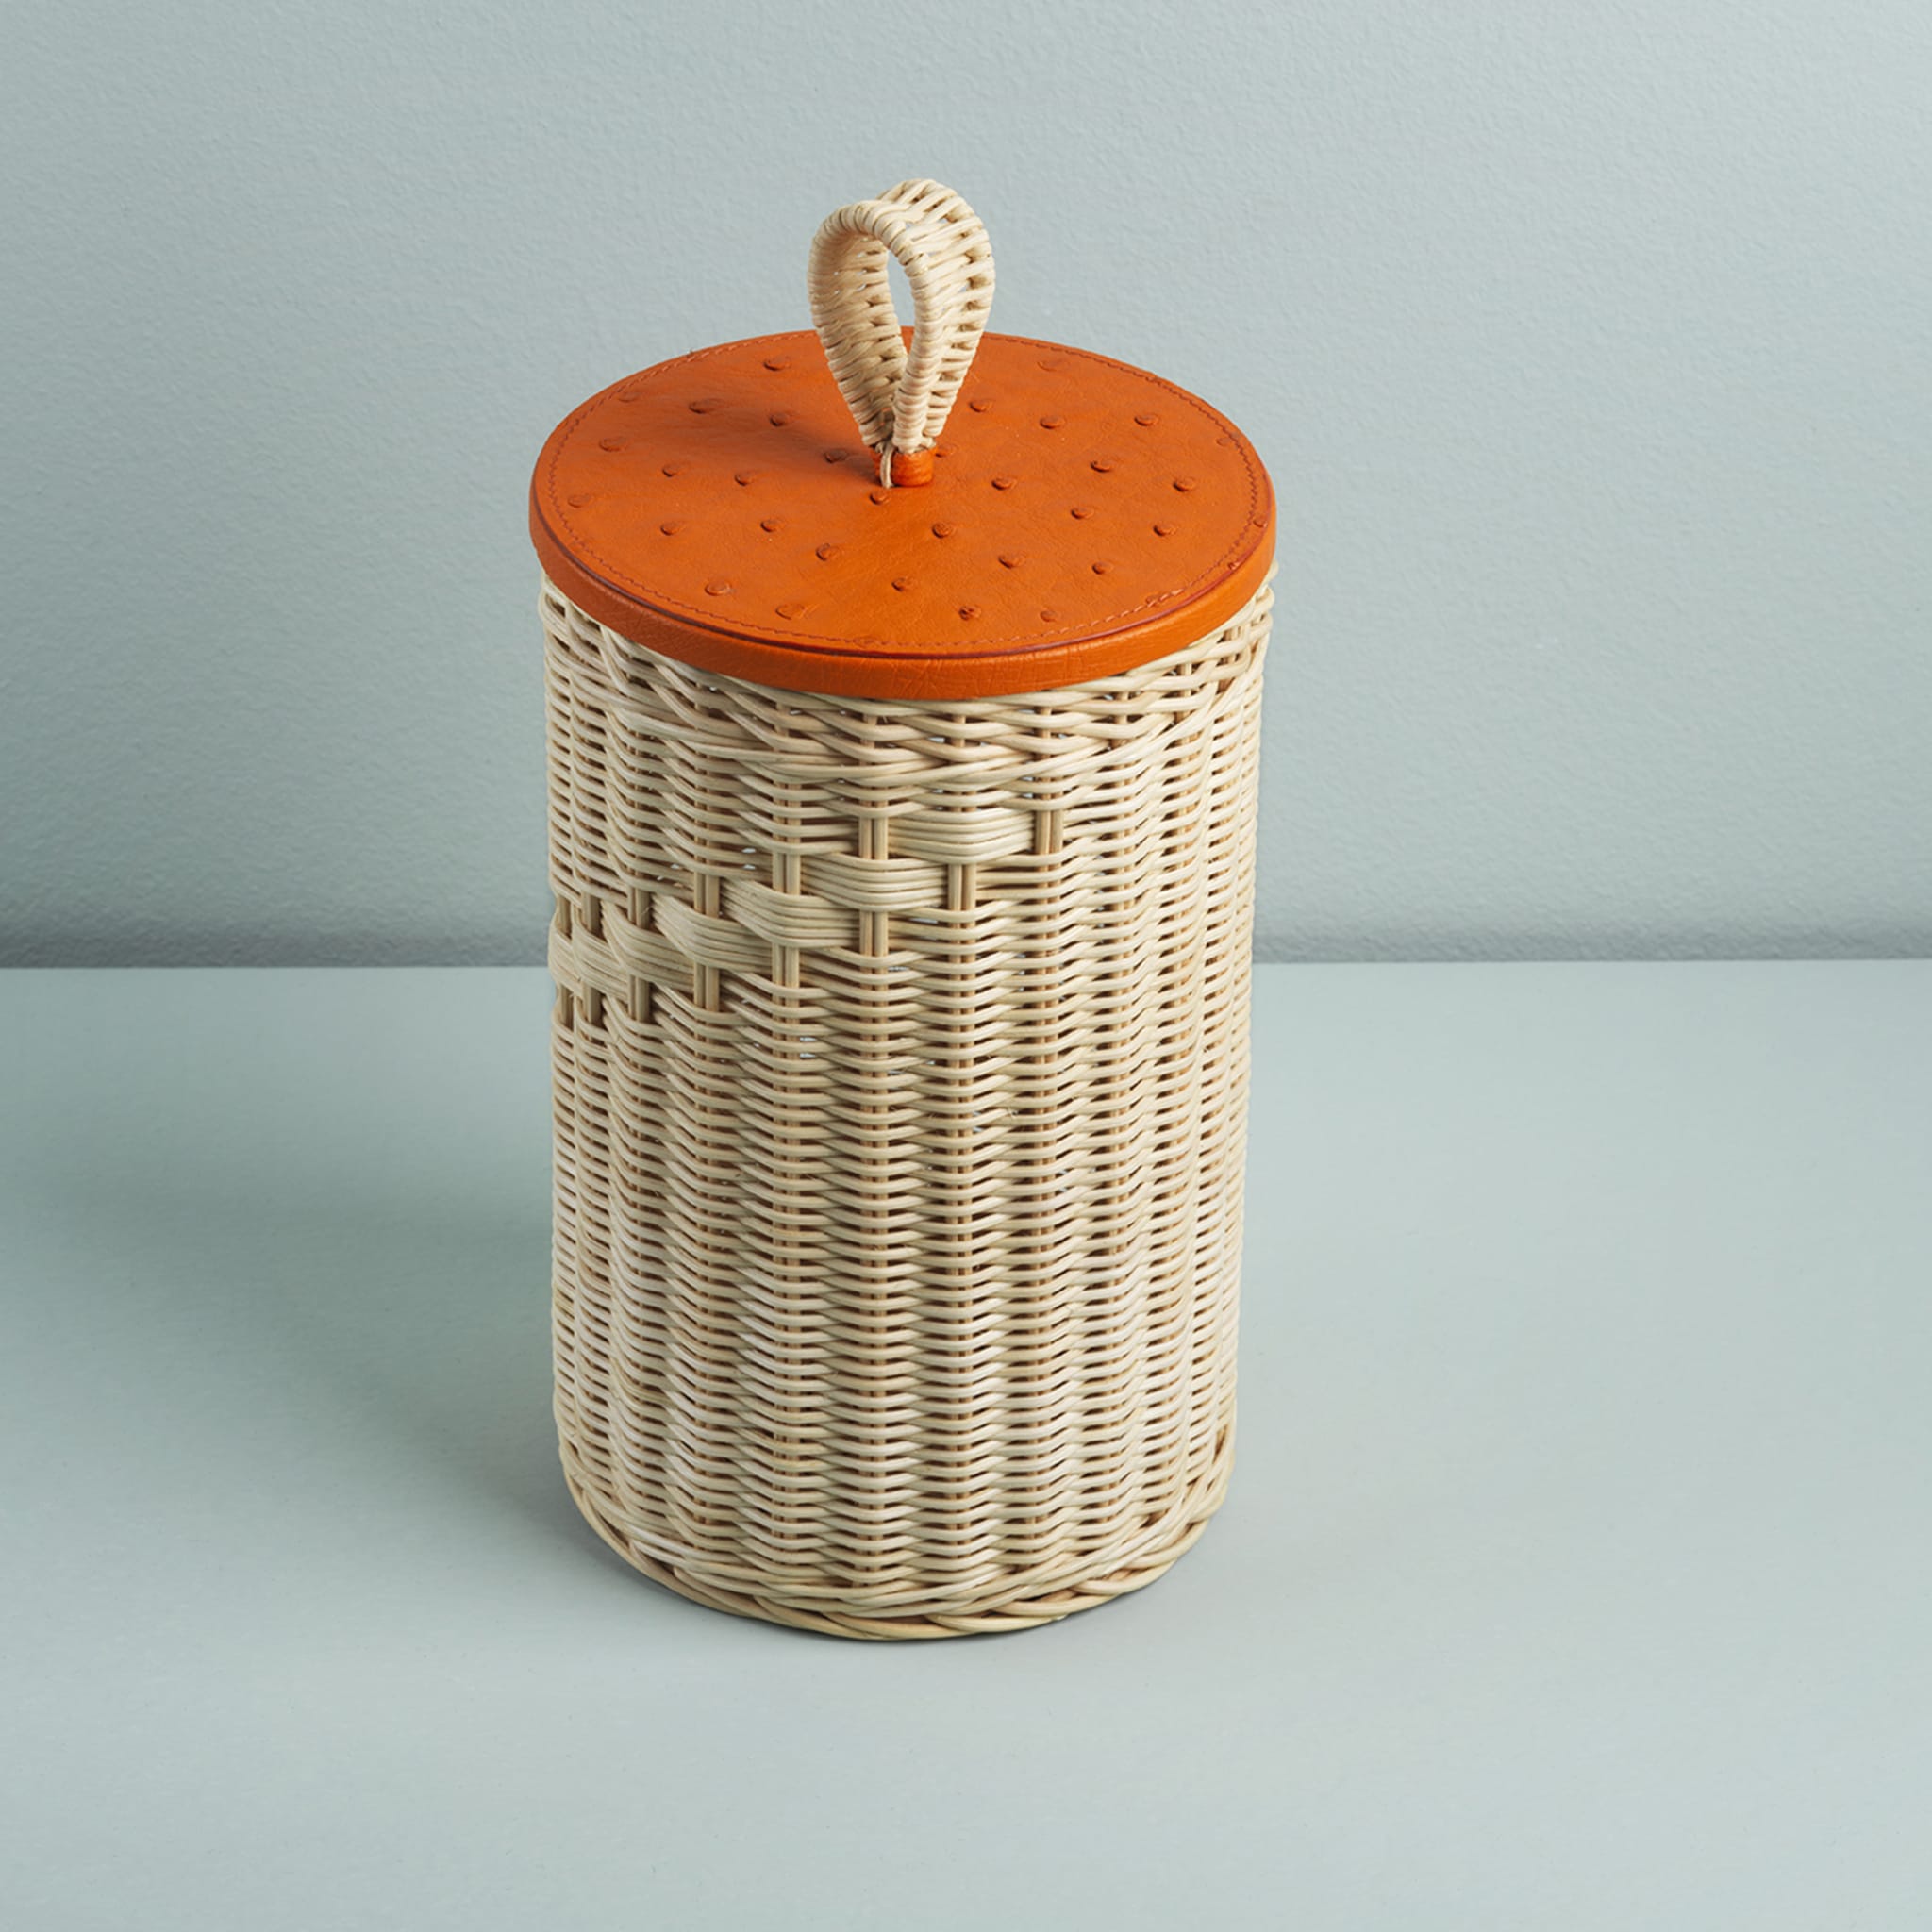 Goccia Tall Wicker Jar with Wood Lid Covered with Ostrich Leather - Alternative view 1